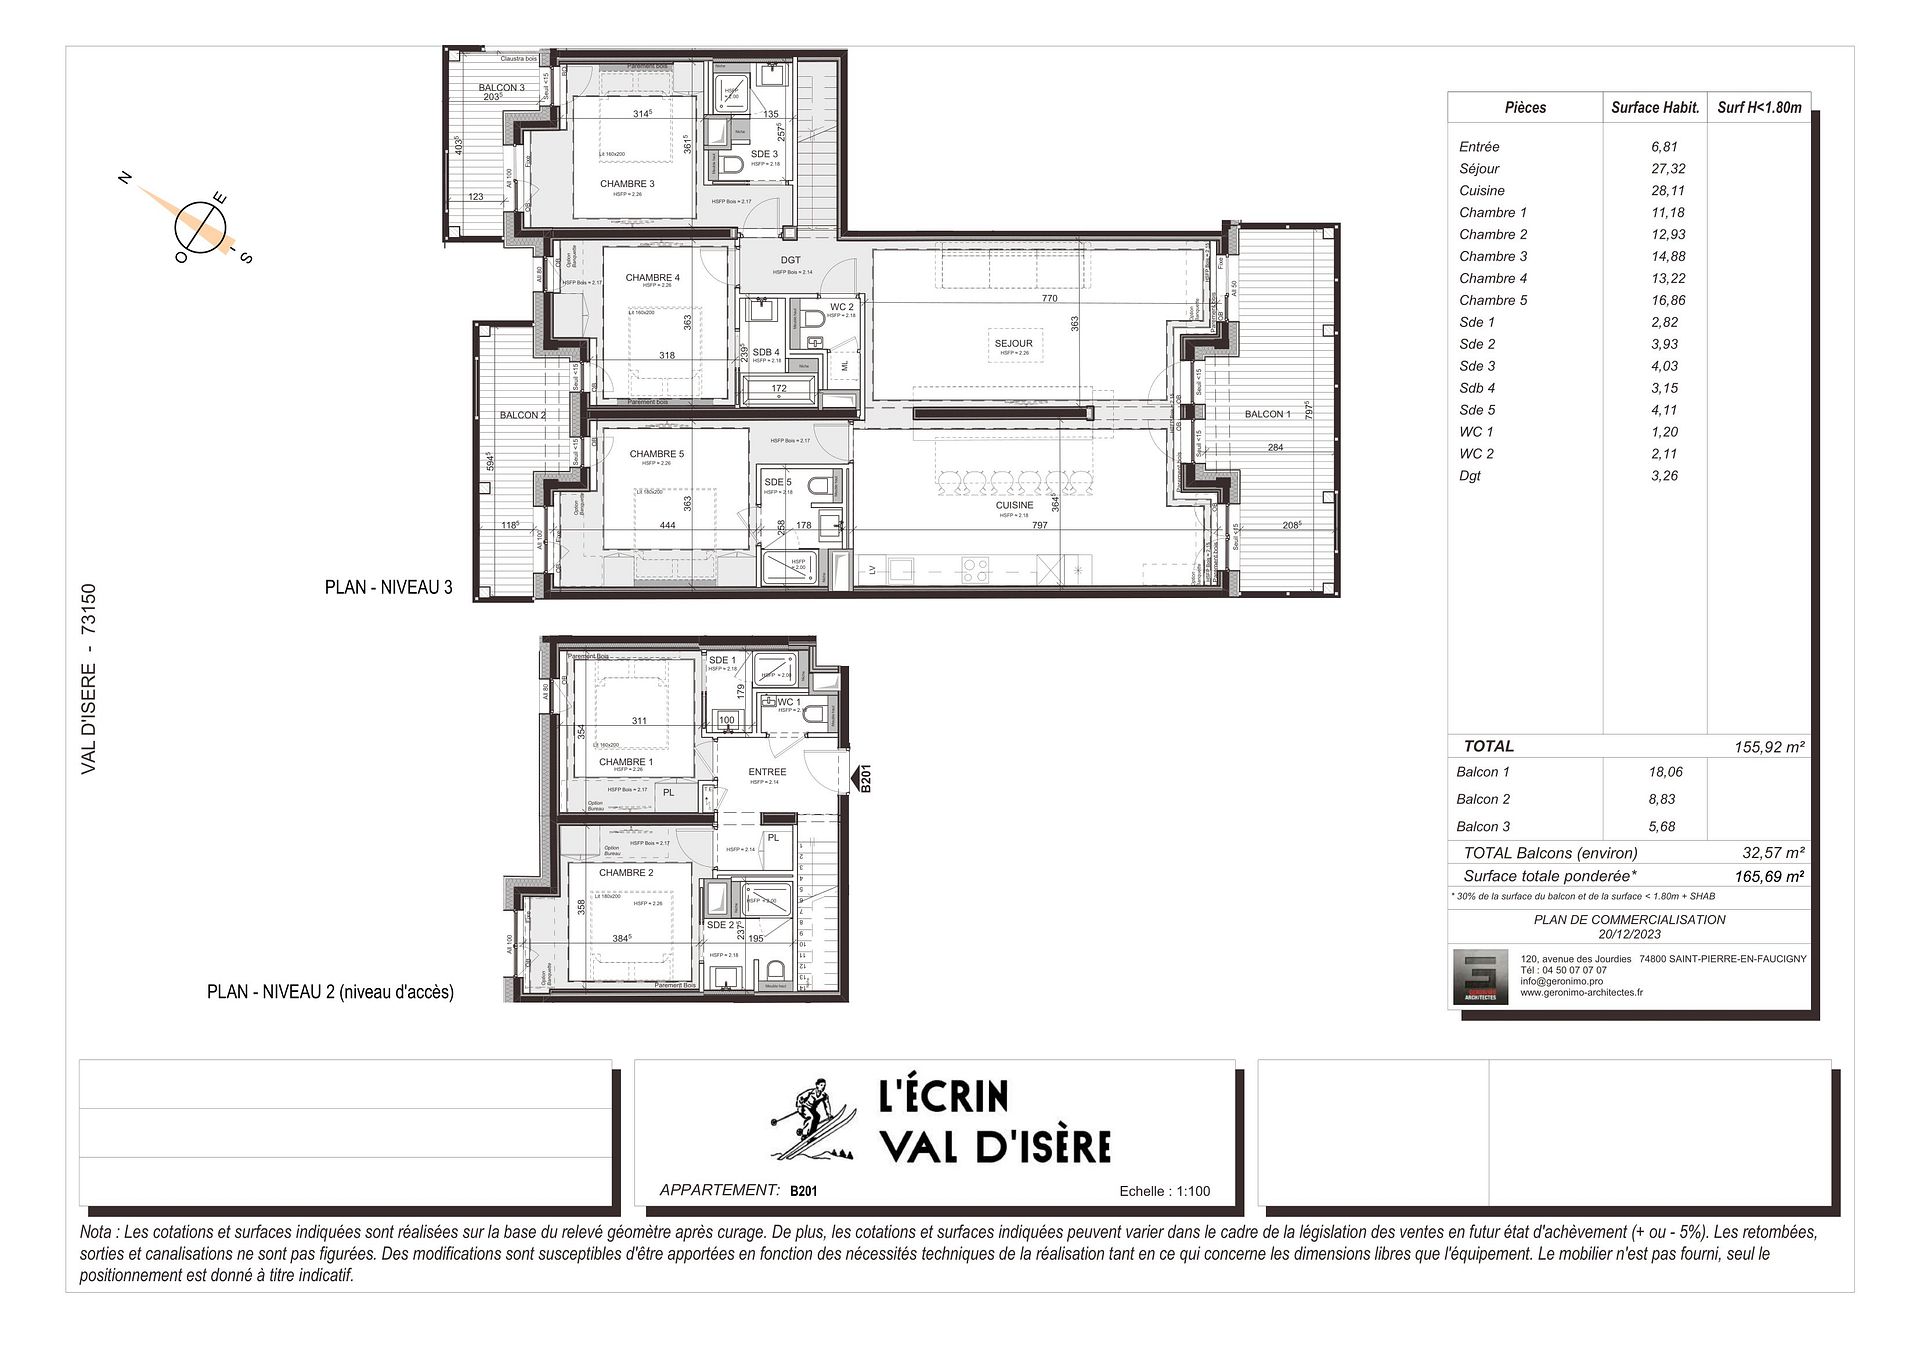 5 bed Apartment For Sale in Espace Killy, French Alps